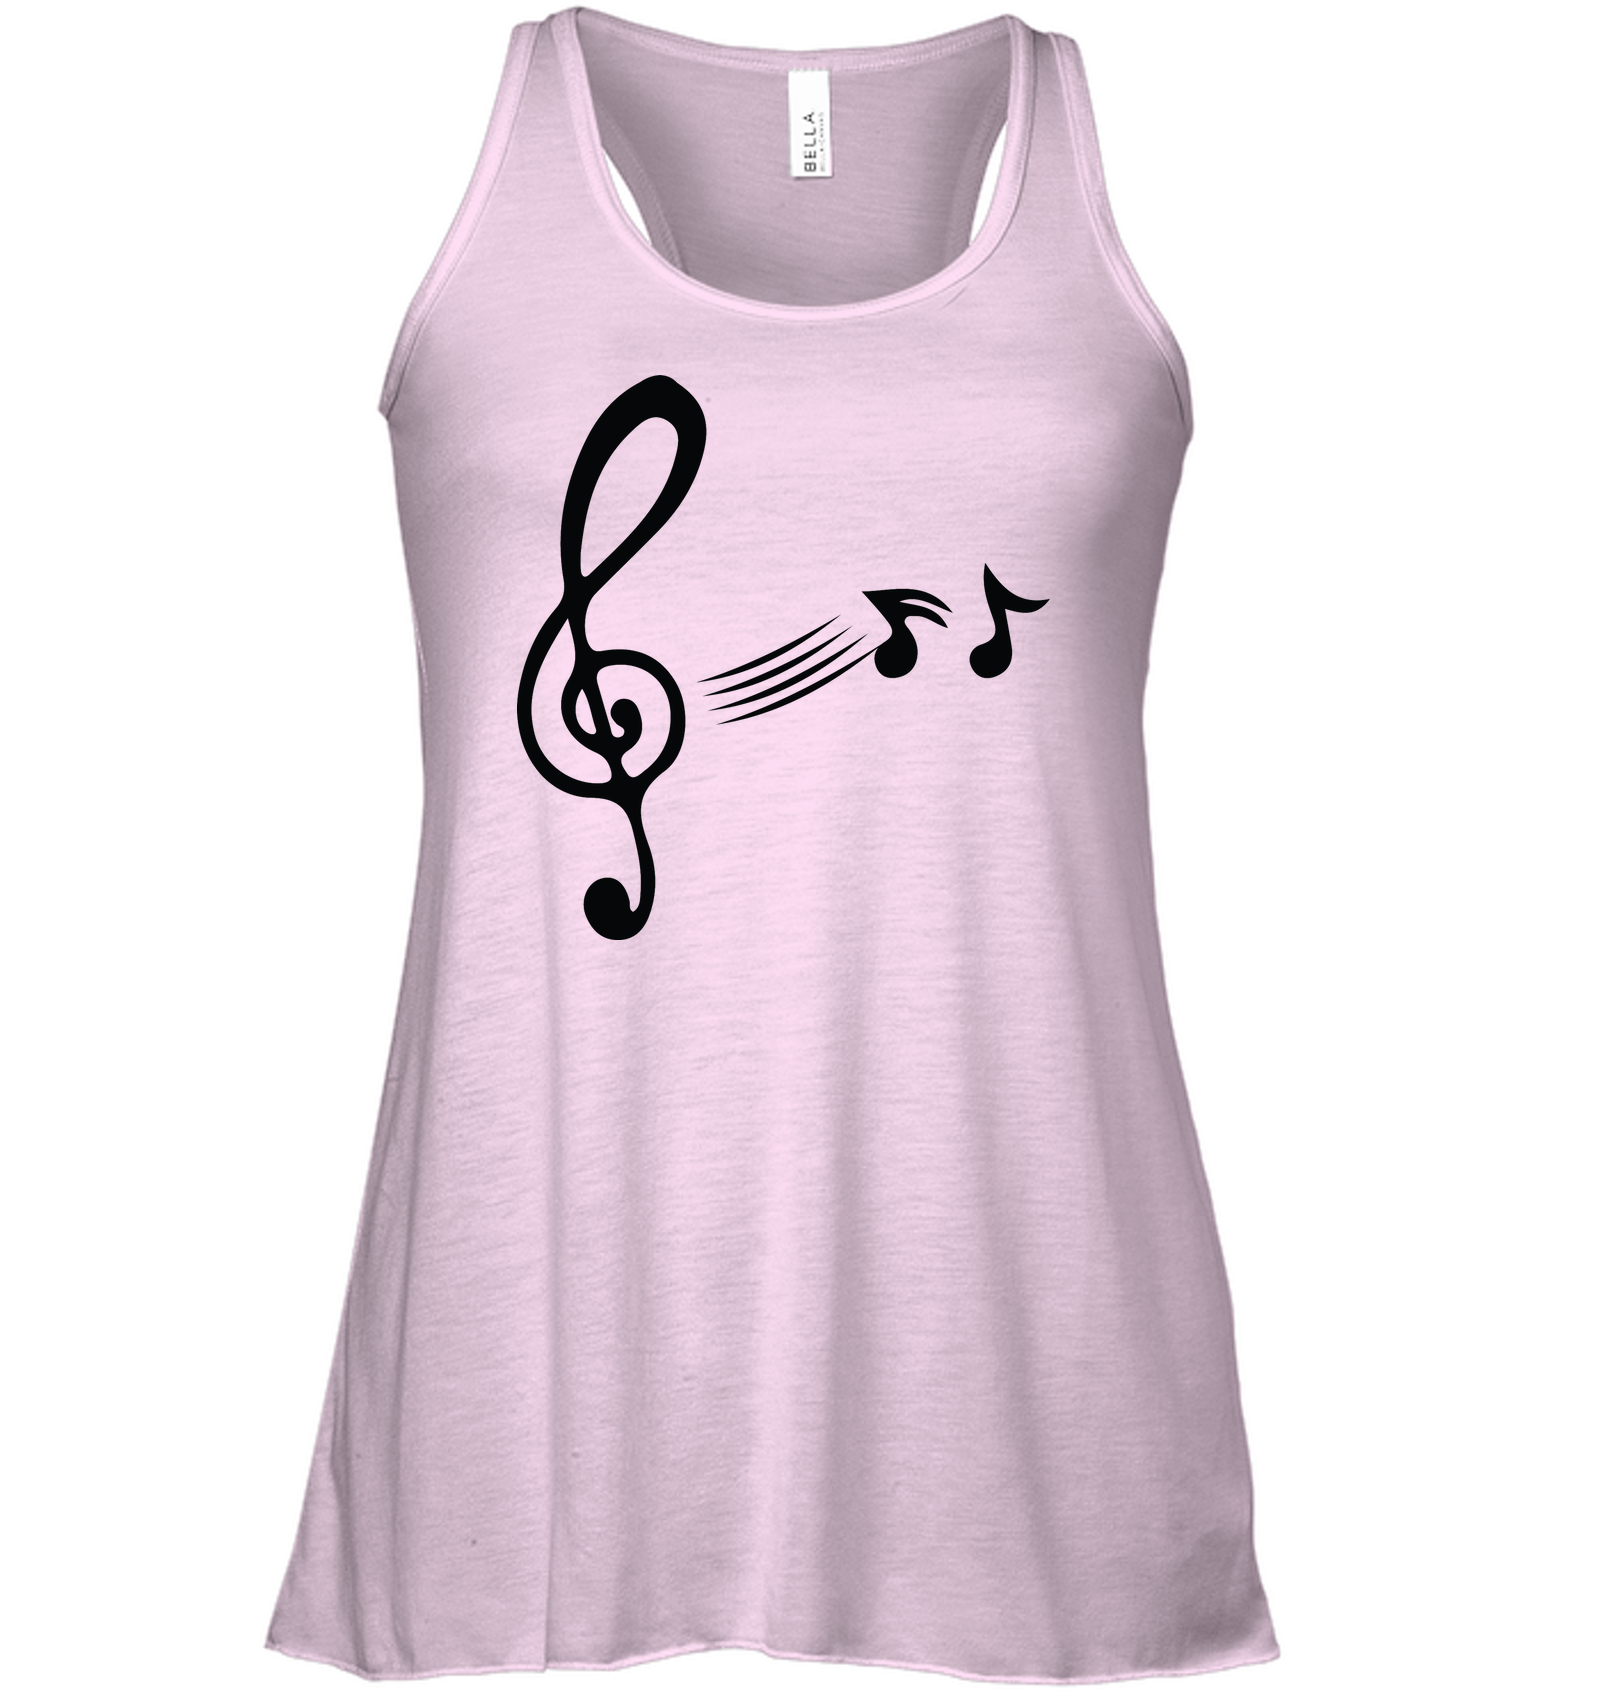 Treble Clef with floating Notes - Bella + Canvas Women's Flowy Racerback Tank